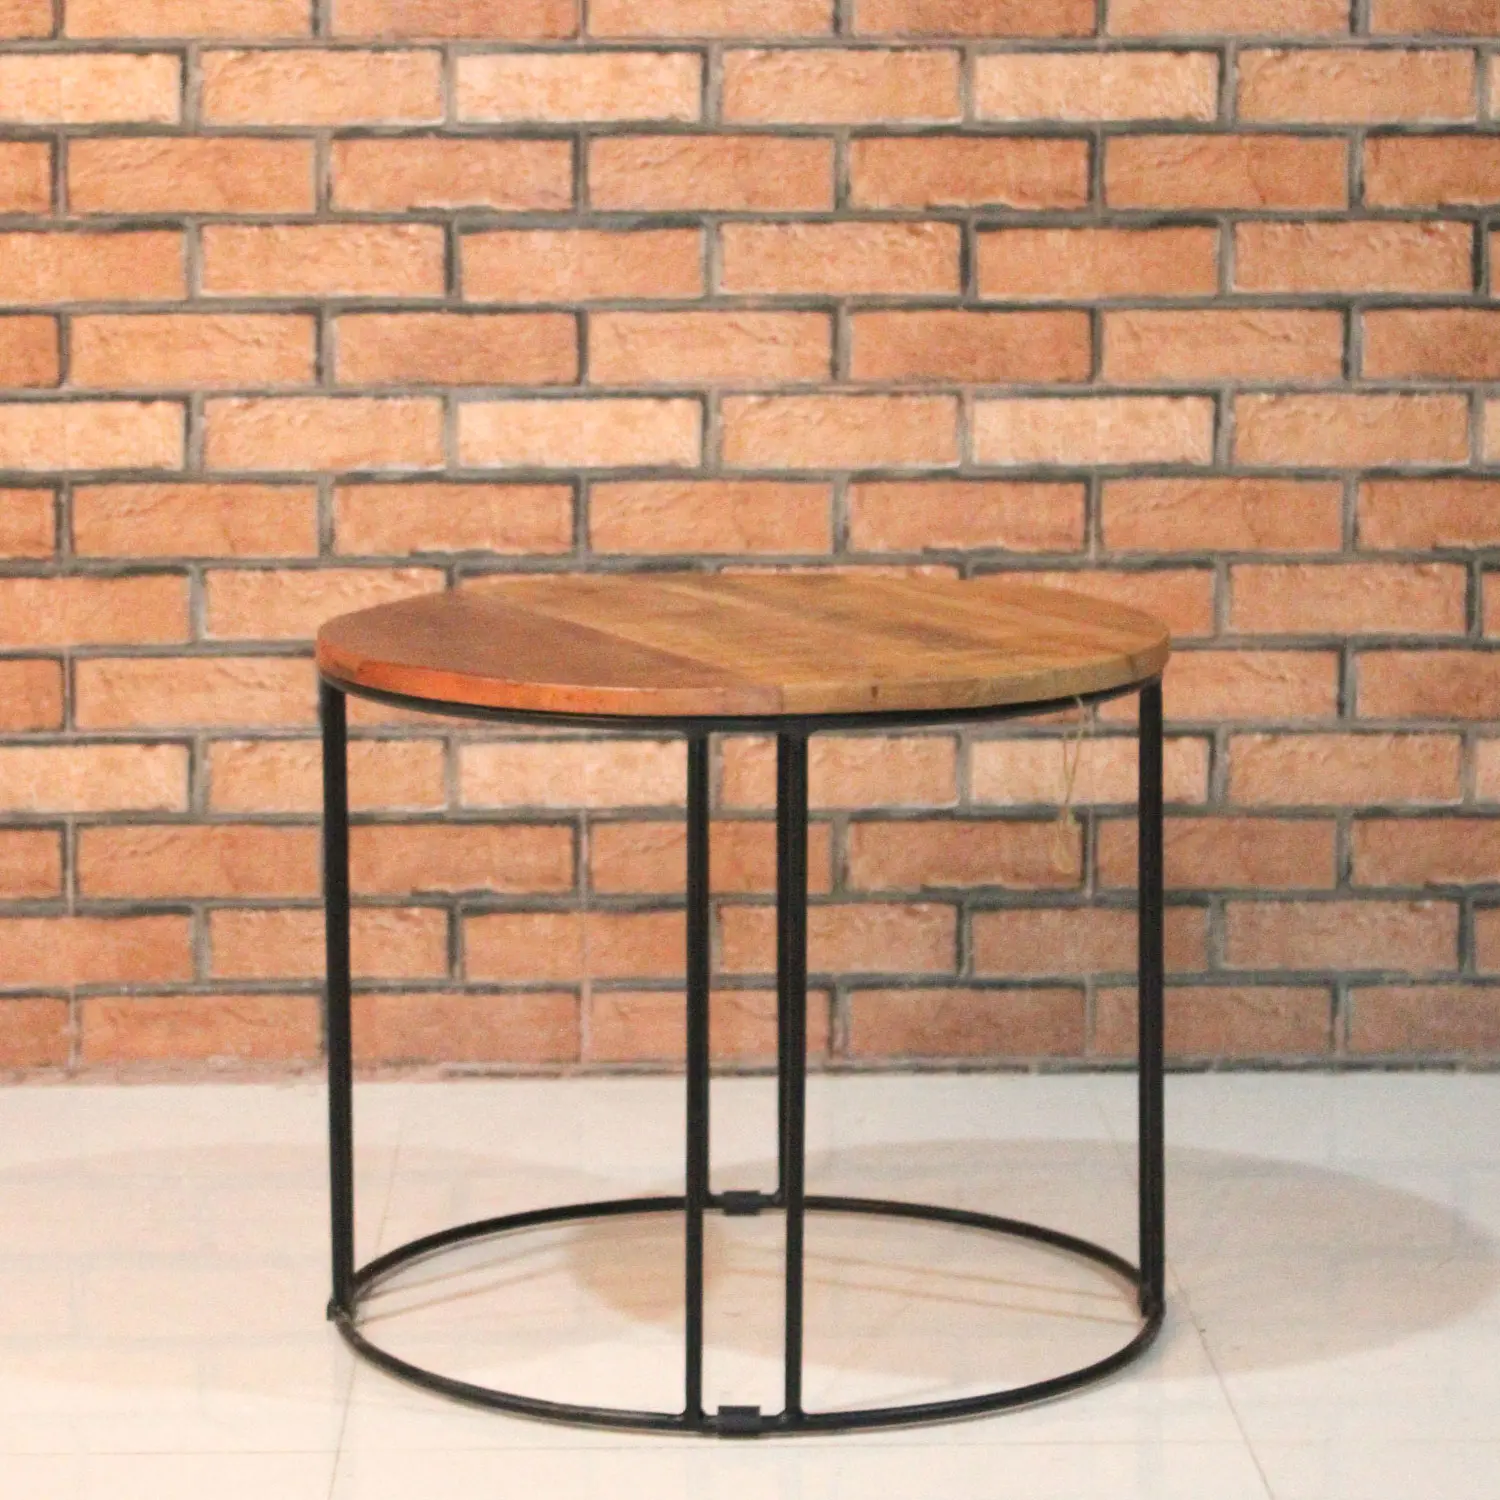 Iron Round Side Table with Wooden Top - popular handicrafts